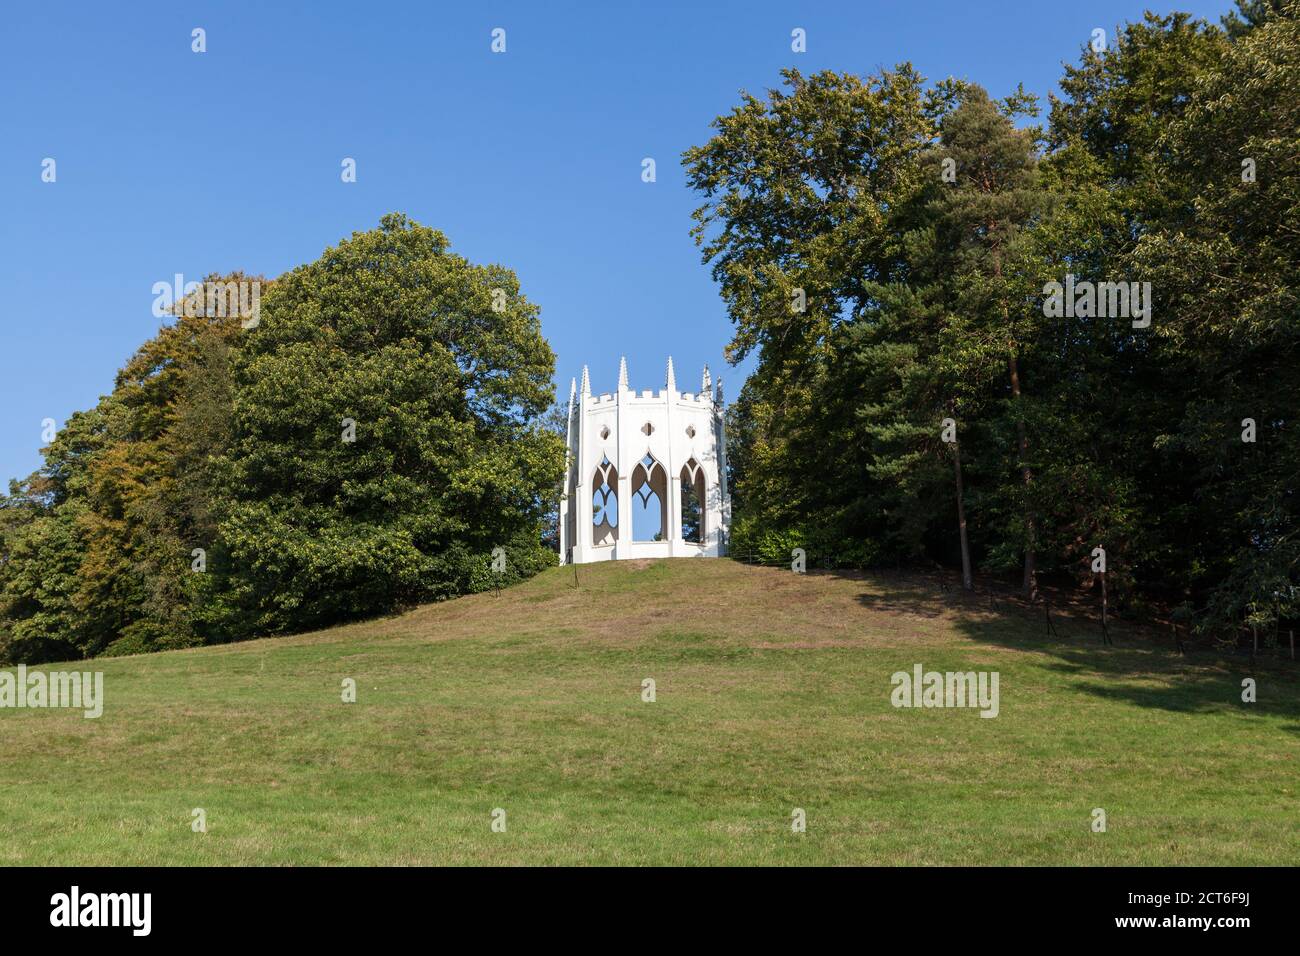 Gothic Temple at Painshill Park in Surrey, UK. Stock Photo